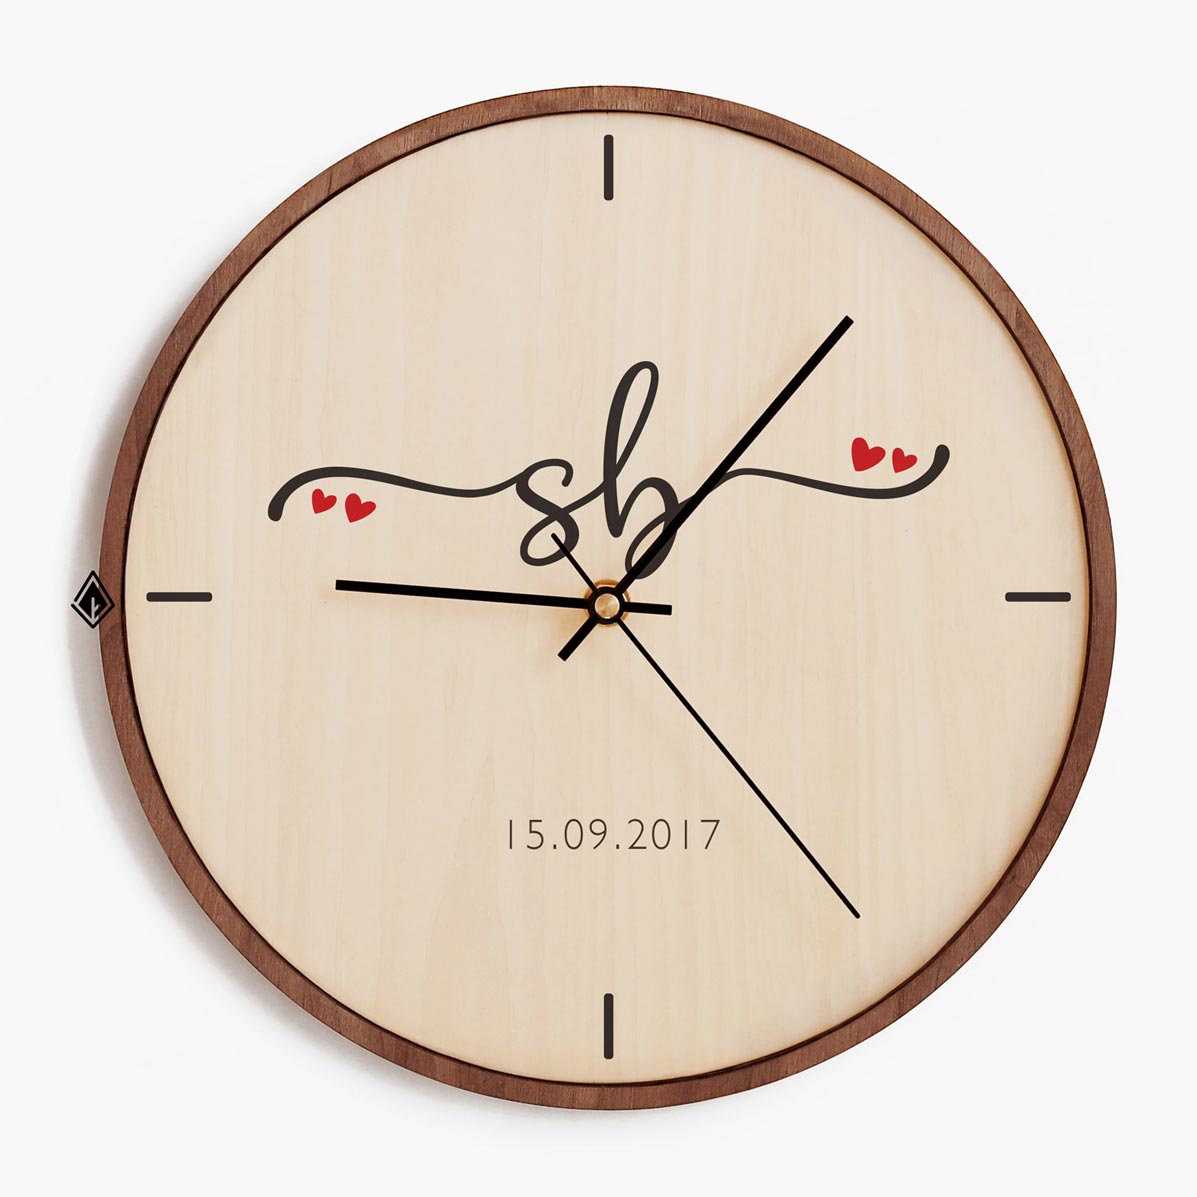 Wooden Wall Clocks Your name